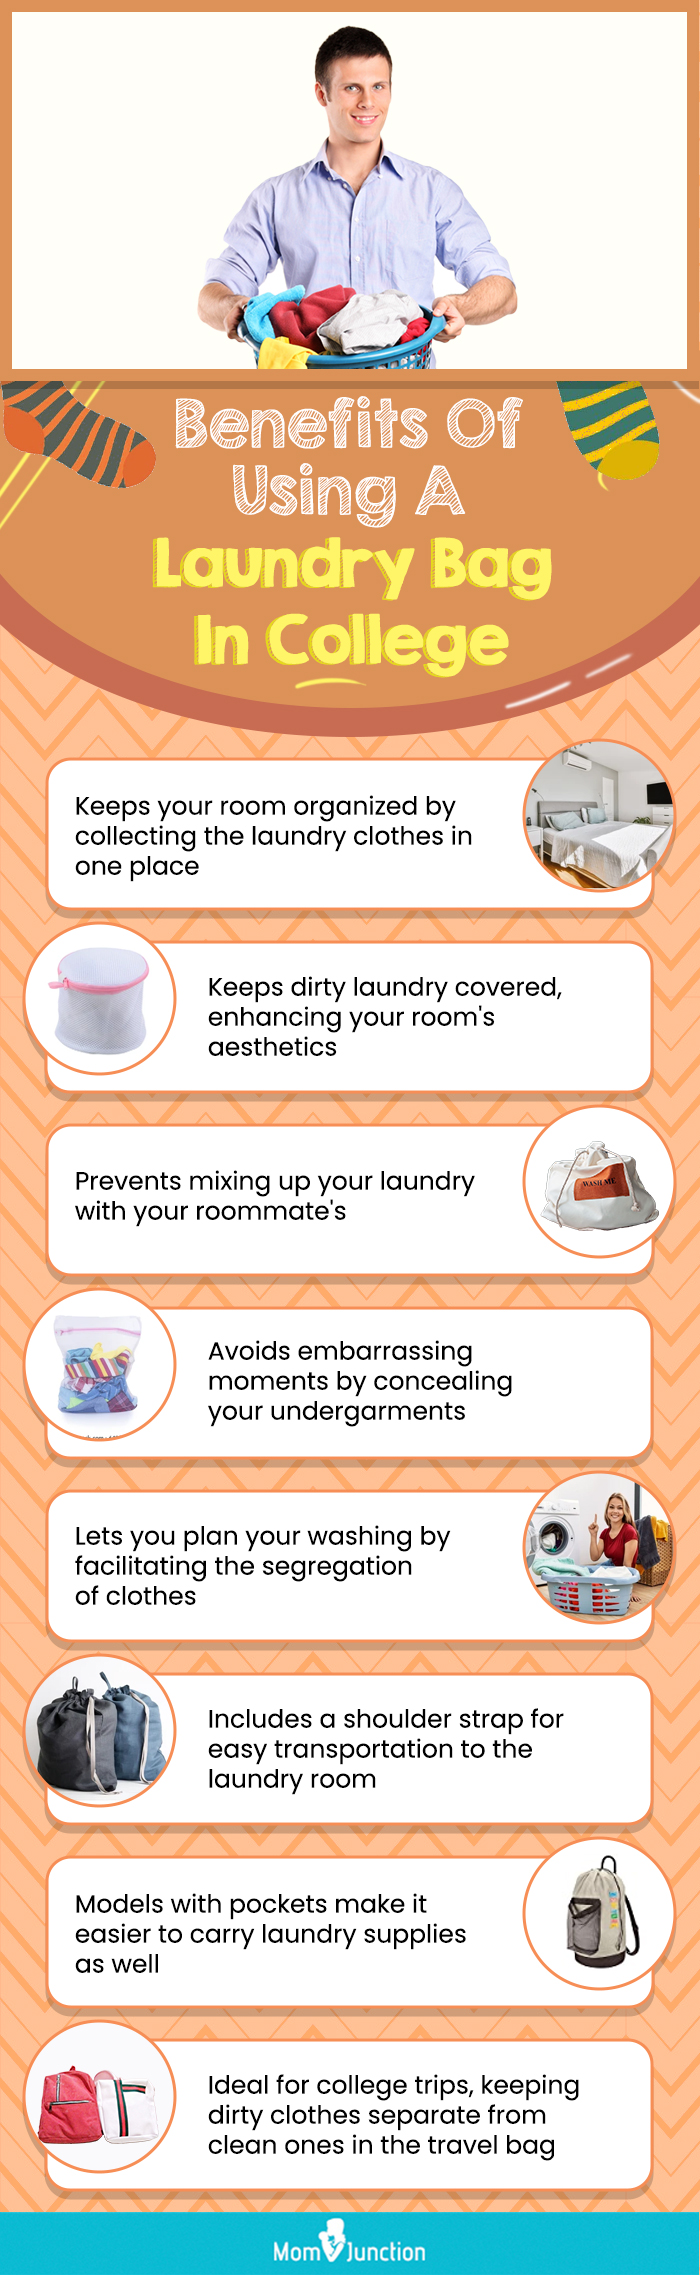 Benefits Of Using A Laundry Bag In College (infographic)